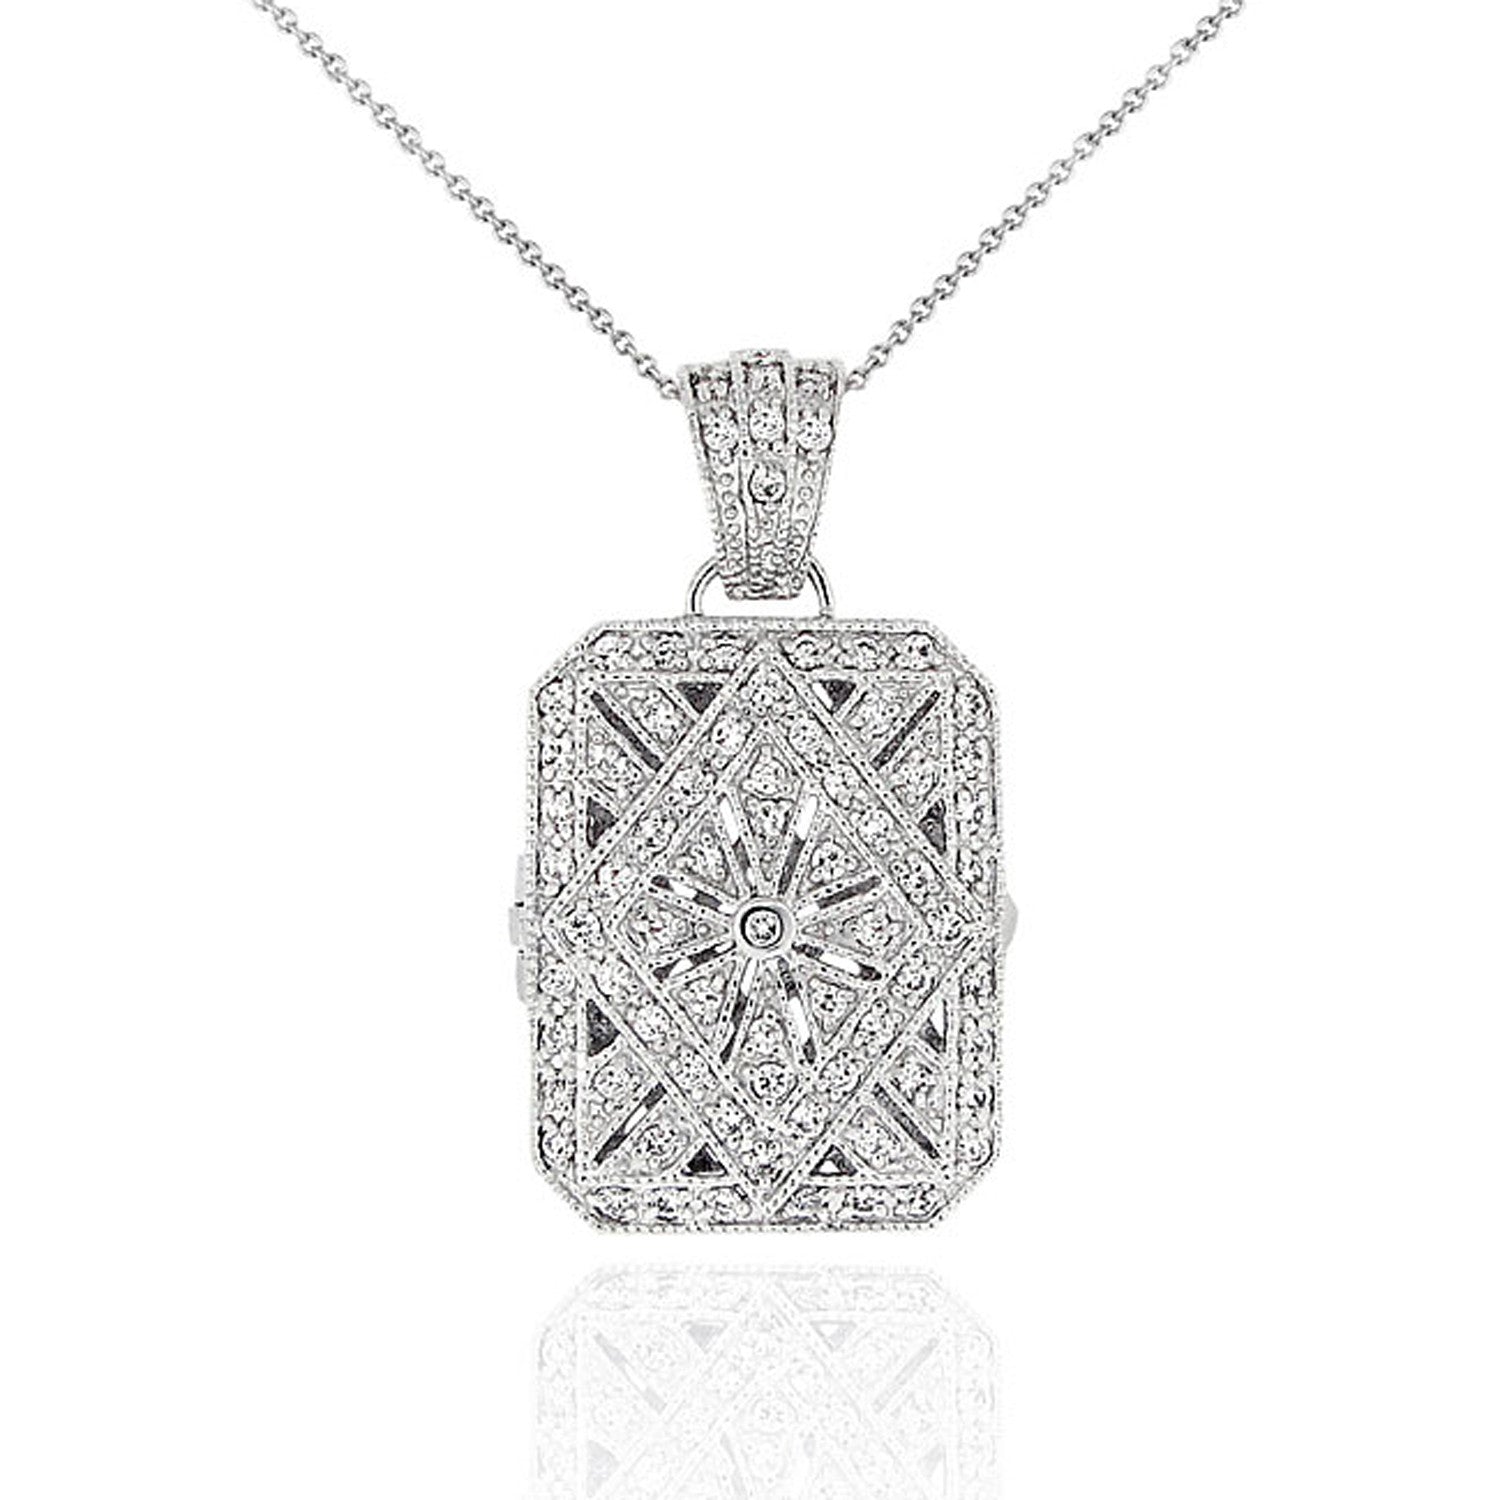 Sterling Silver Rectanglular Locket Necklace With Cubic Zirconia Accents